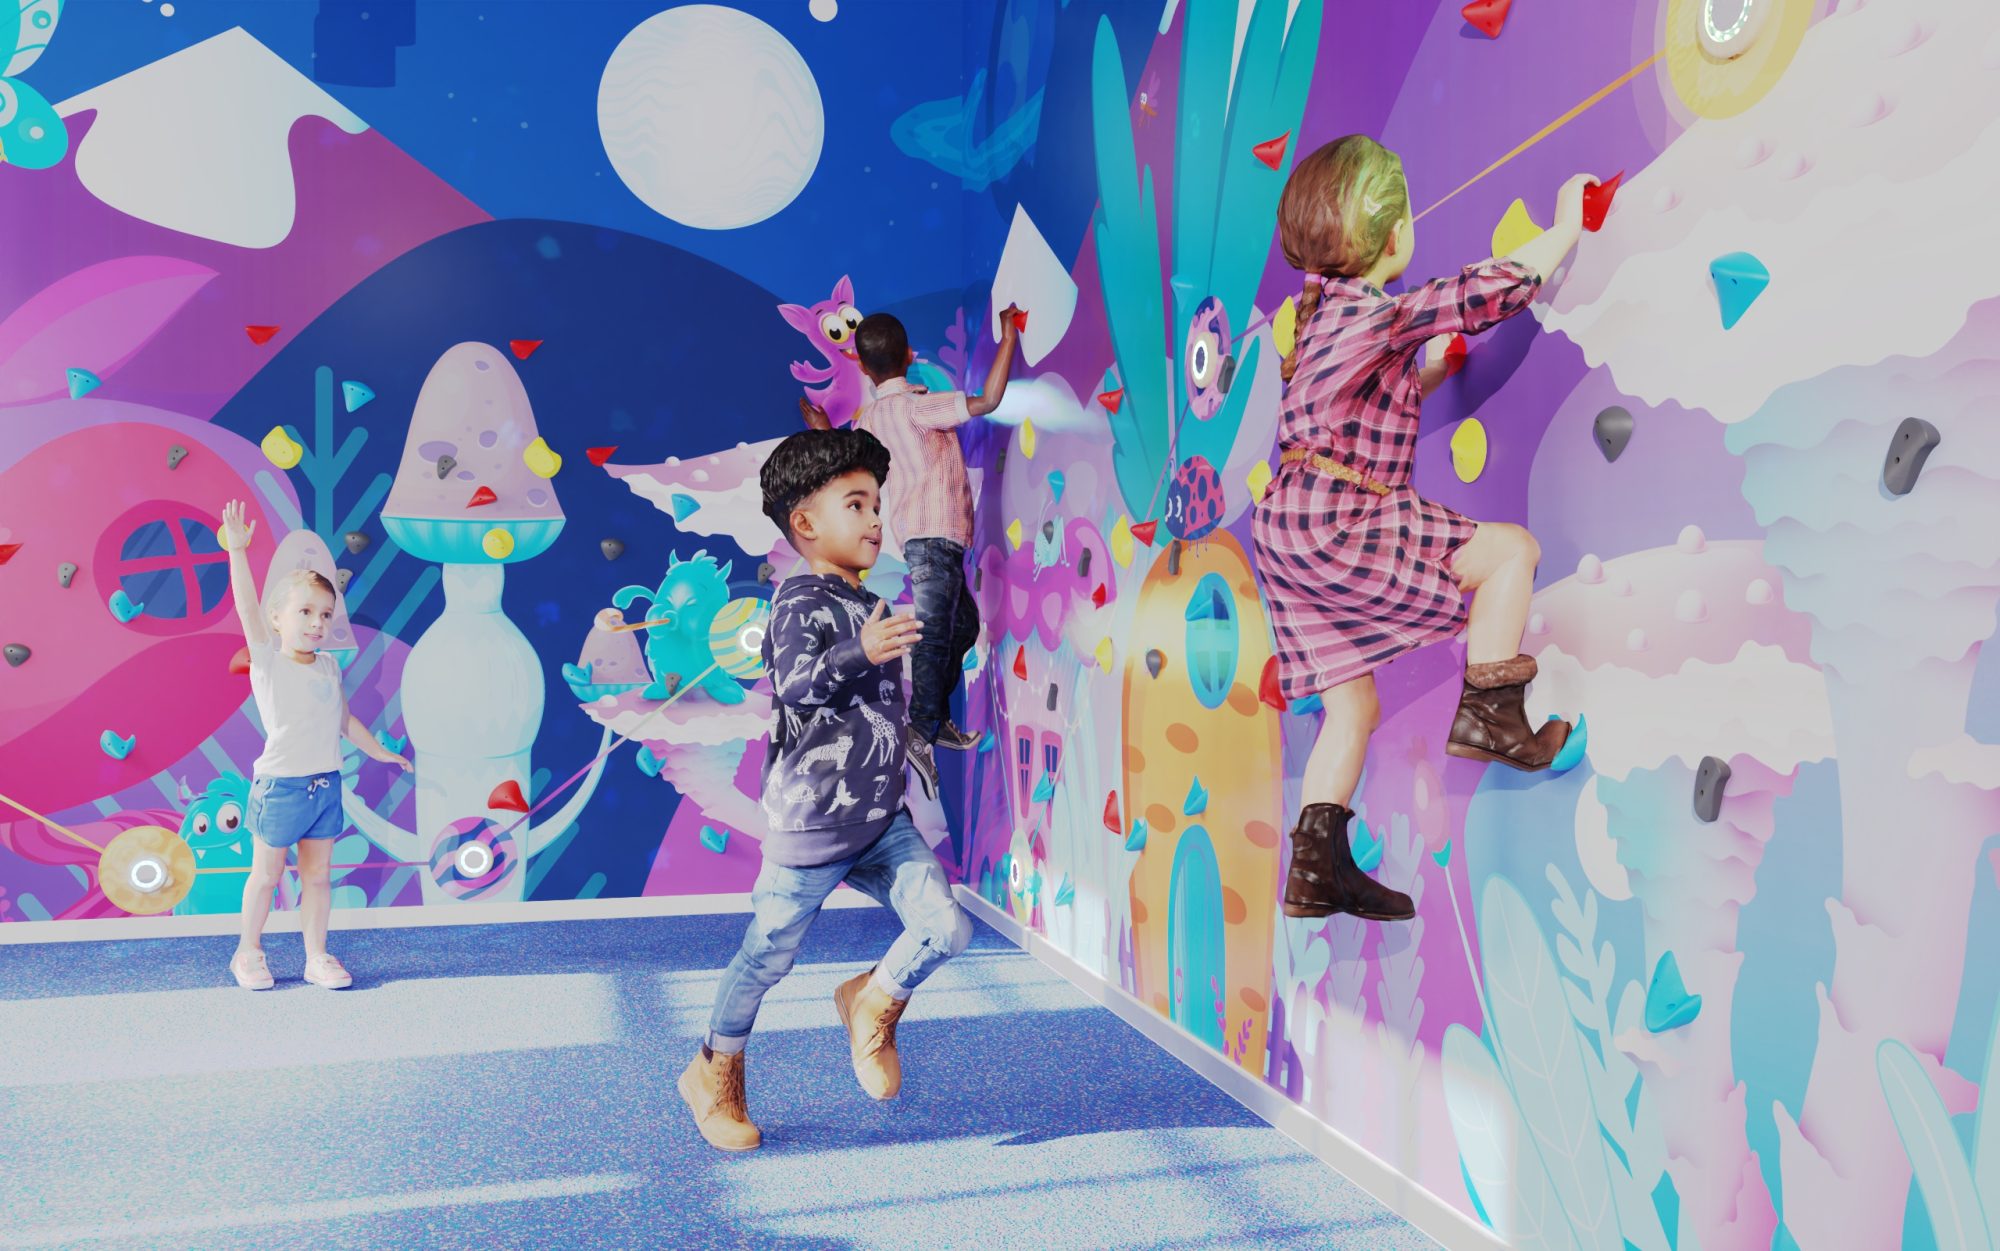 Make exercise fun with IKC&#8217;s interactive wall!